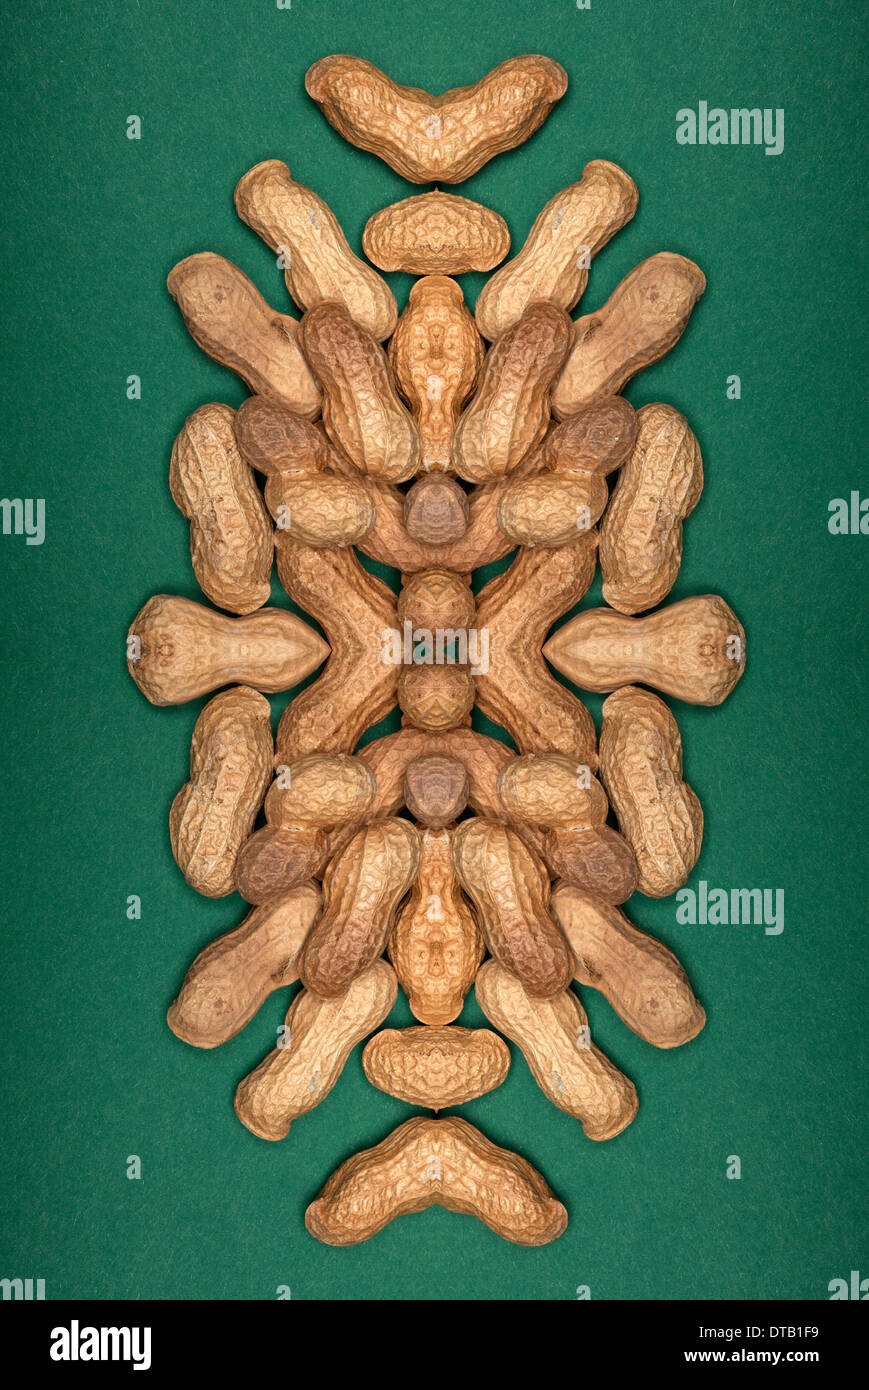 A digital composite of mirrored images of an arrangement of peanuts Stock Photo